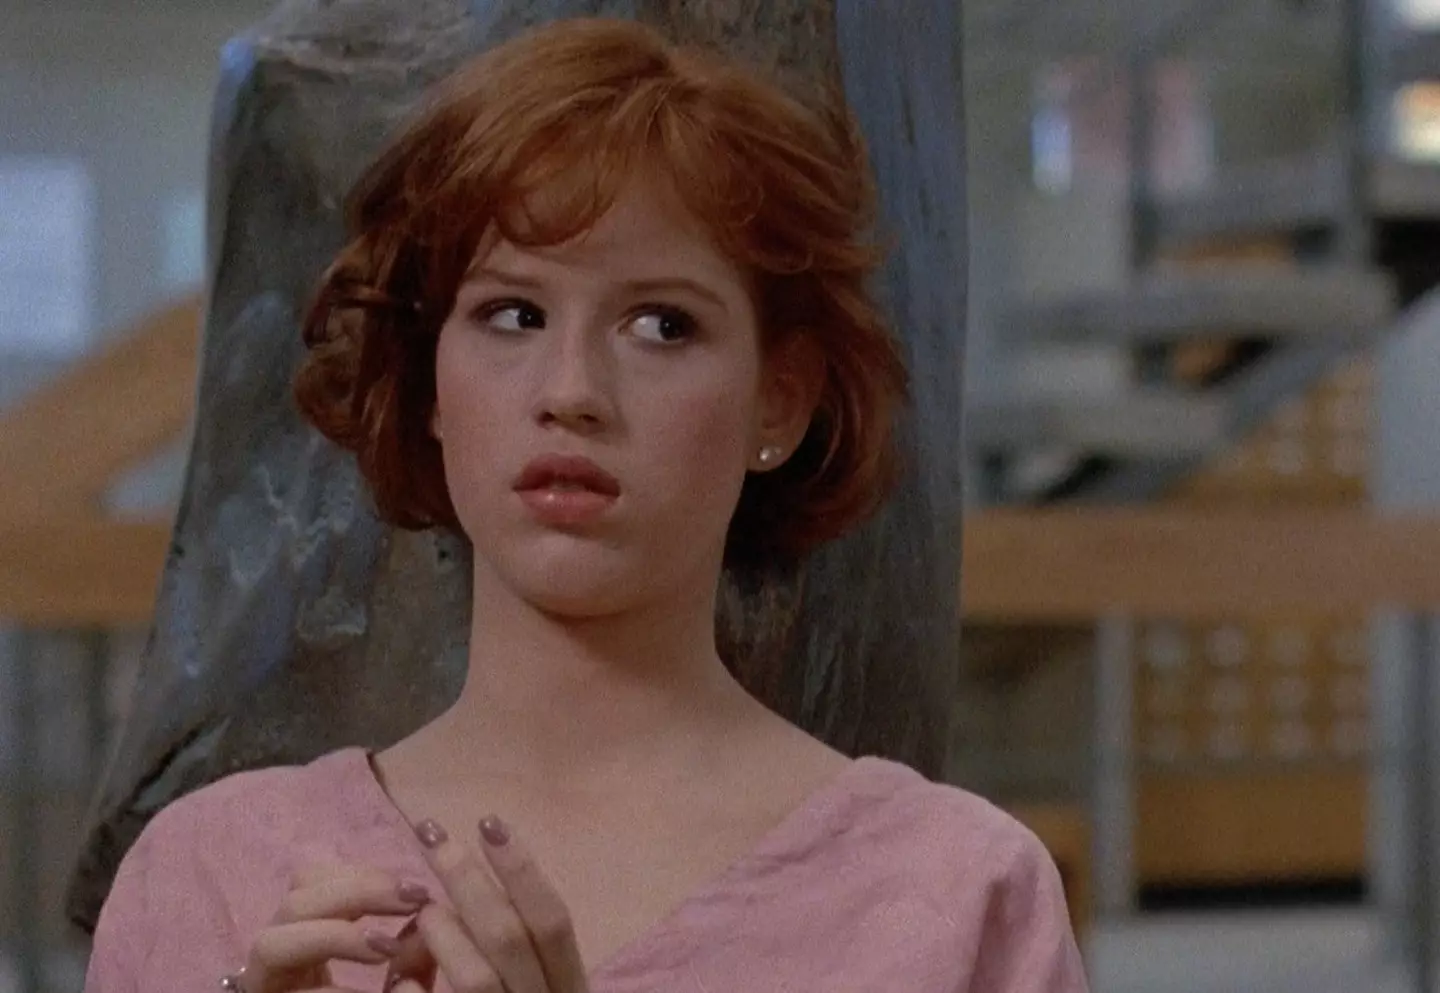 Ringwald made a name for herself acting in 80s teen movies like The Breakfast Club.